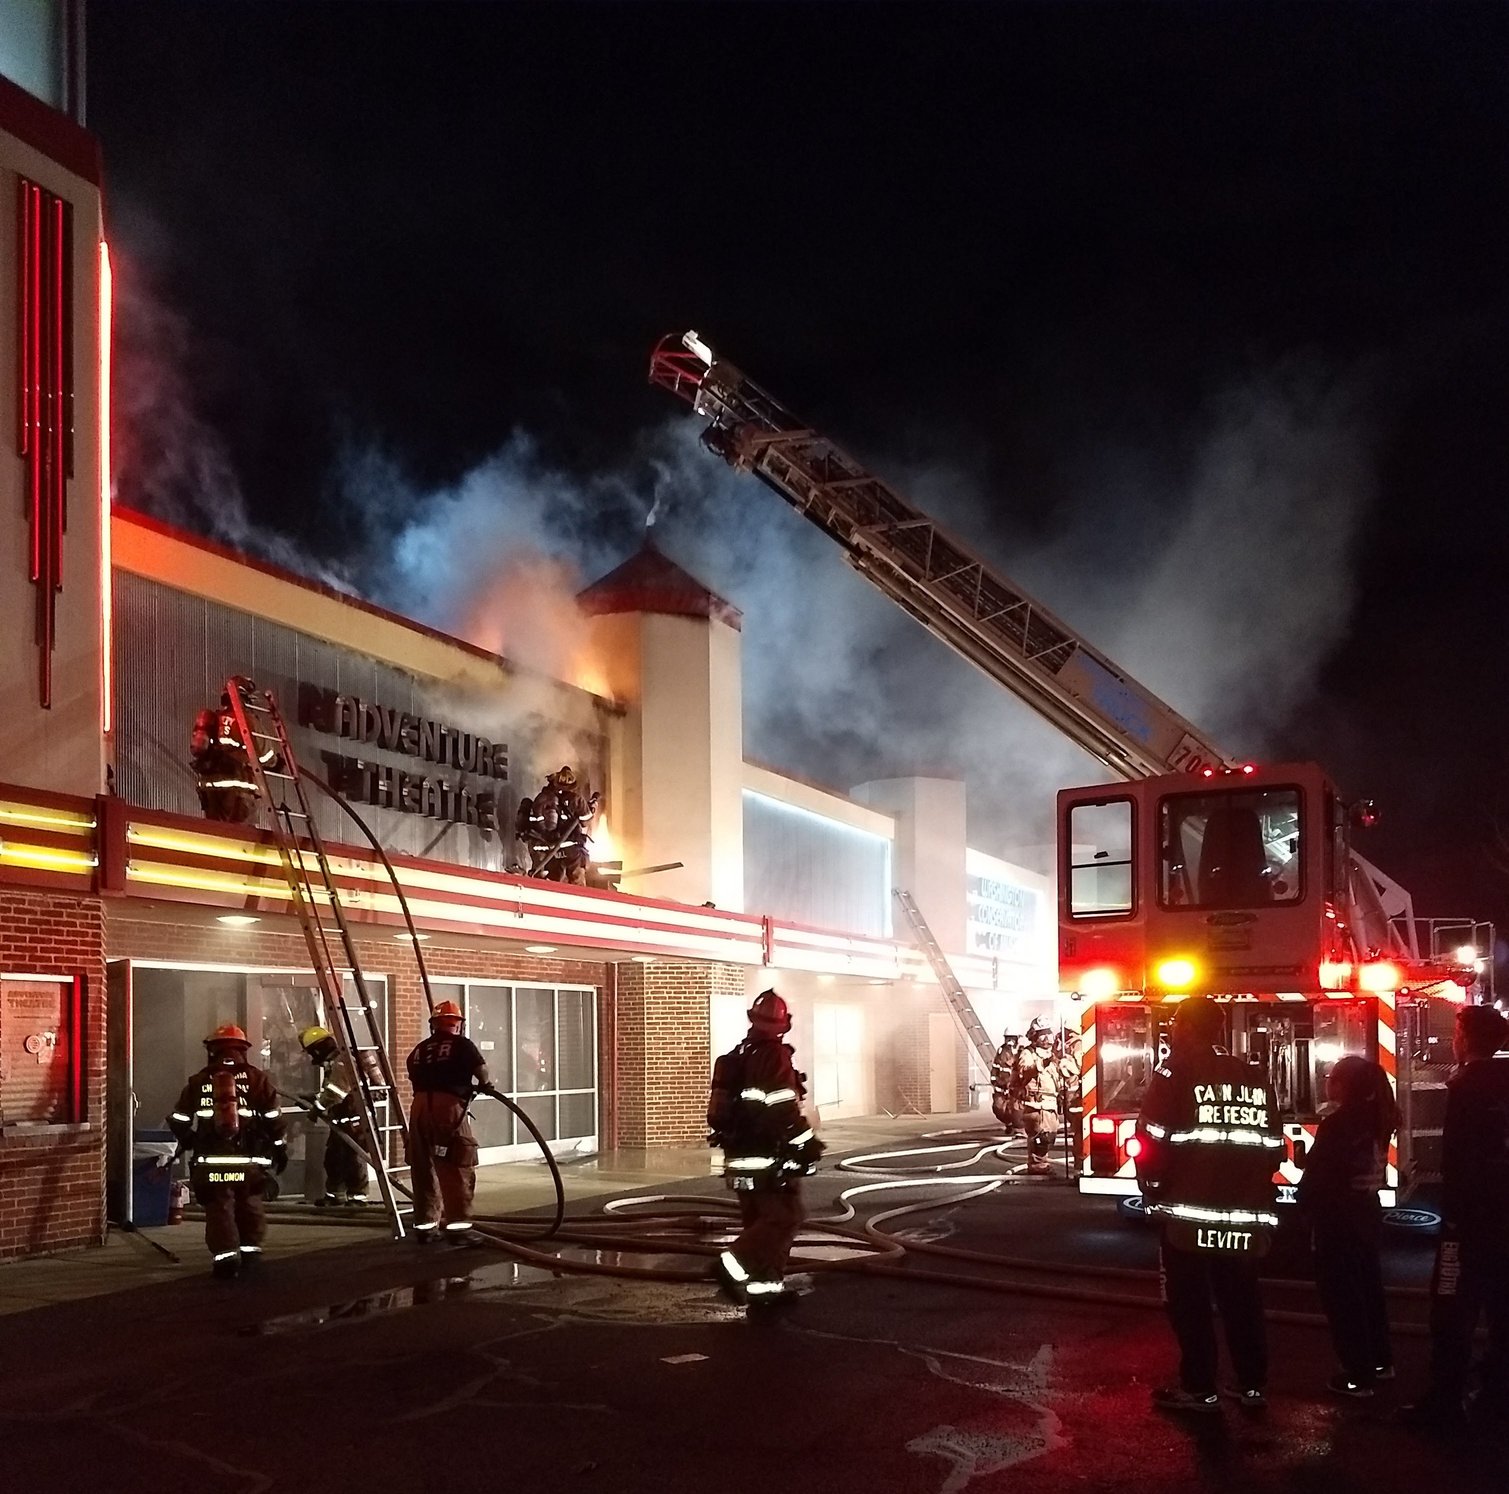 Firefighters battle the March 2nd, 2018 fire at Adventure Theatre. Photo by Glen Echo Park Partnership for Arts and Culture.